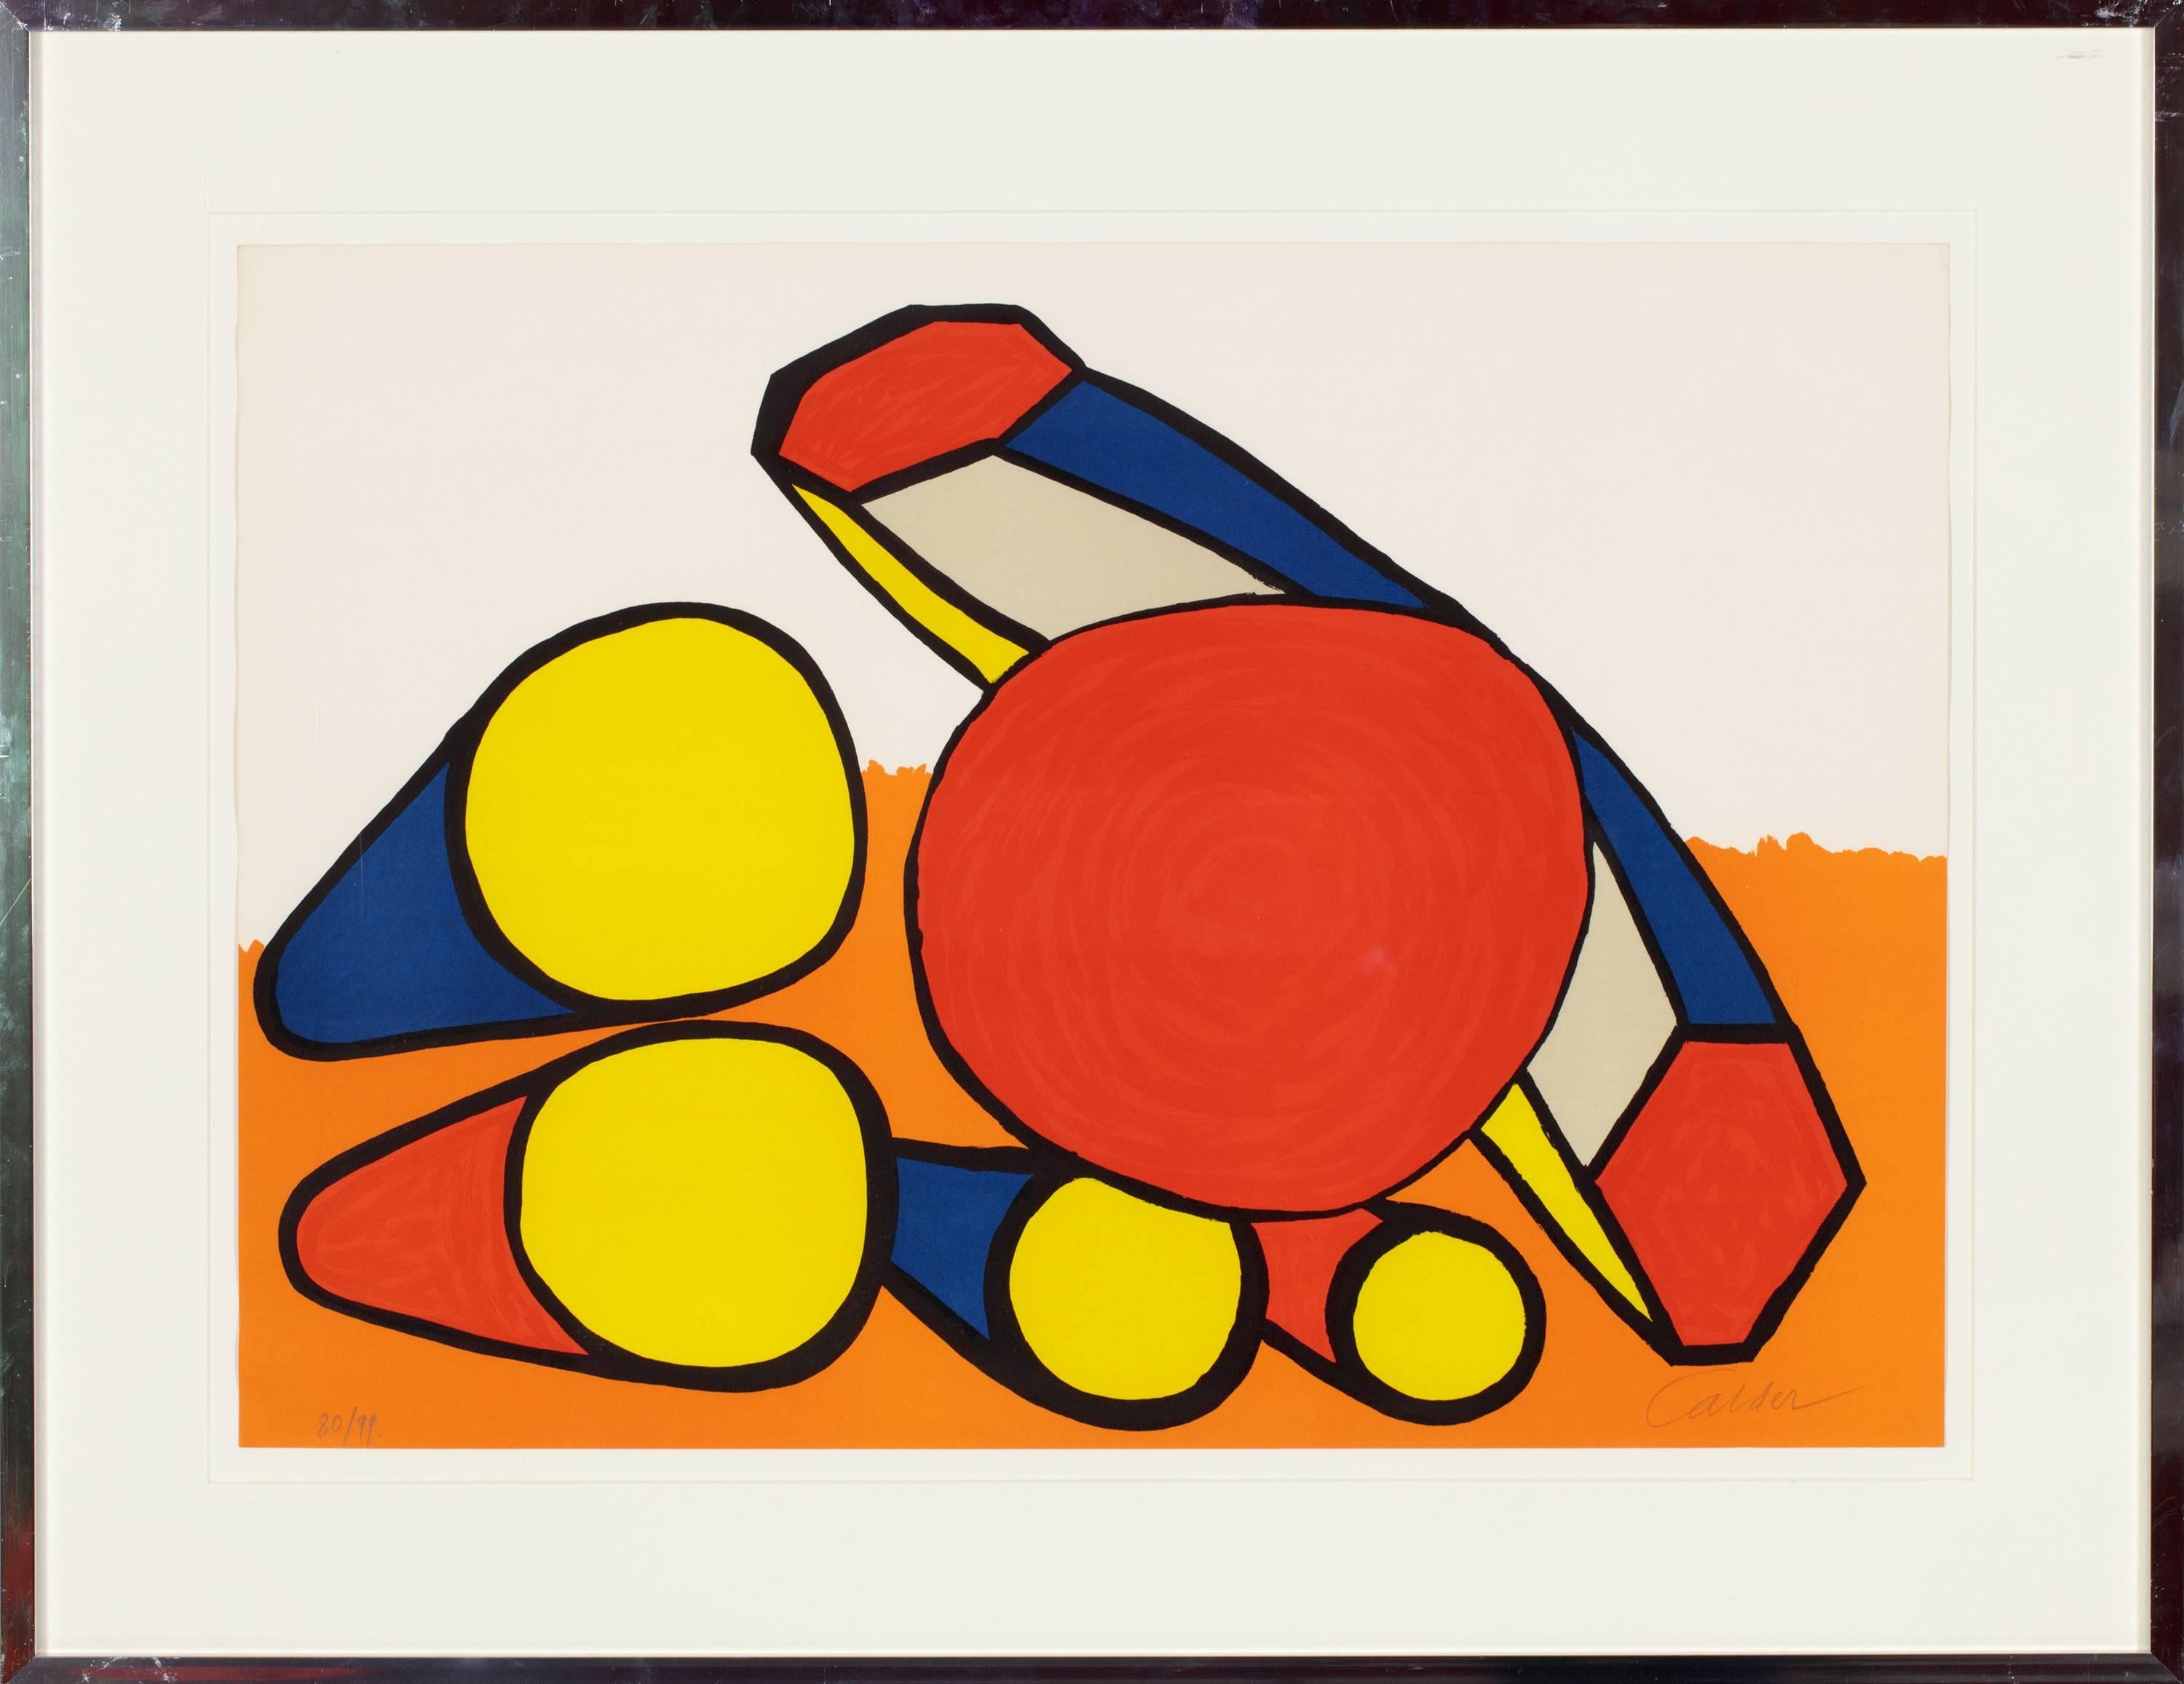 Composition with Circles and Tubes - Post-War Print by Alexander Calder